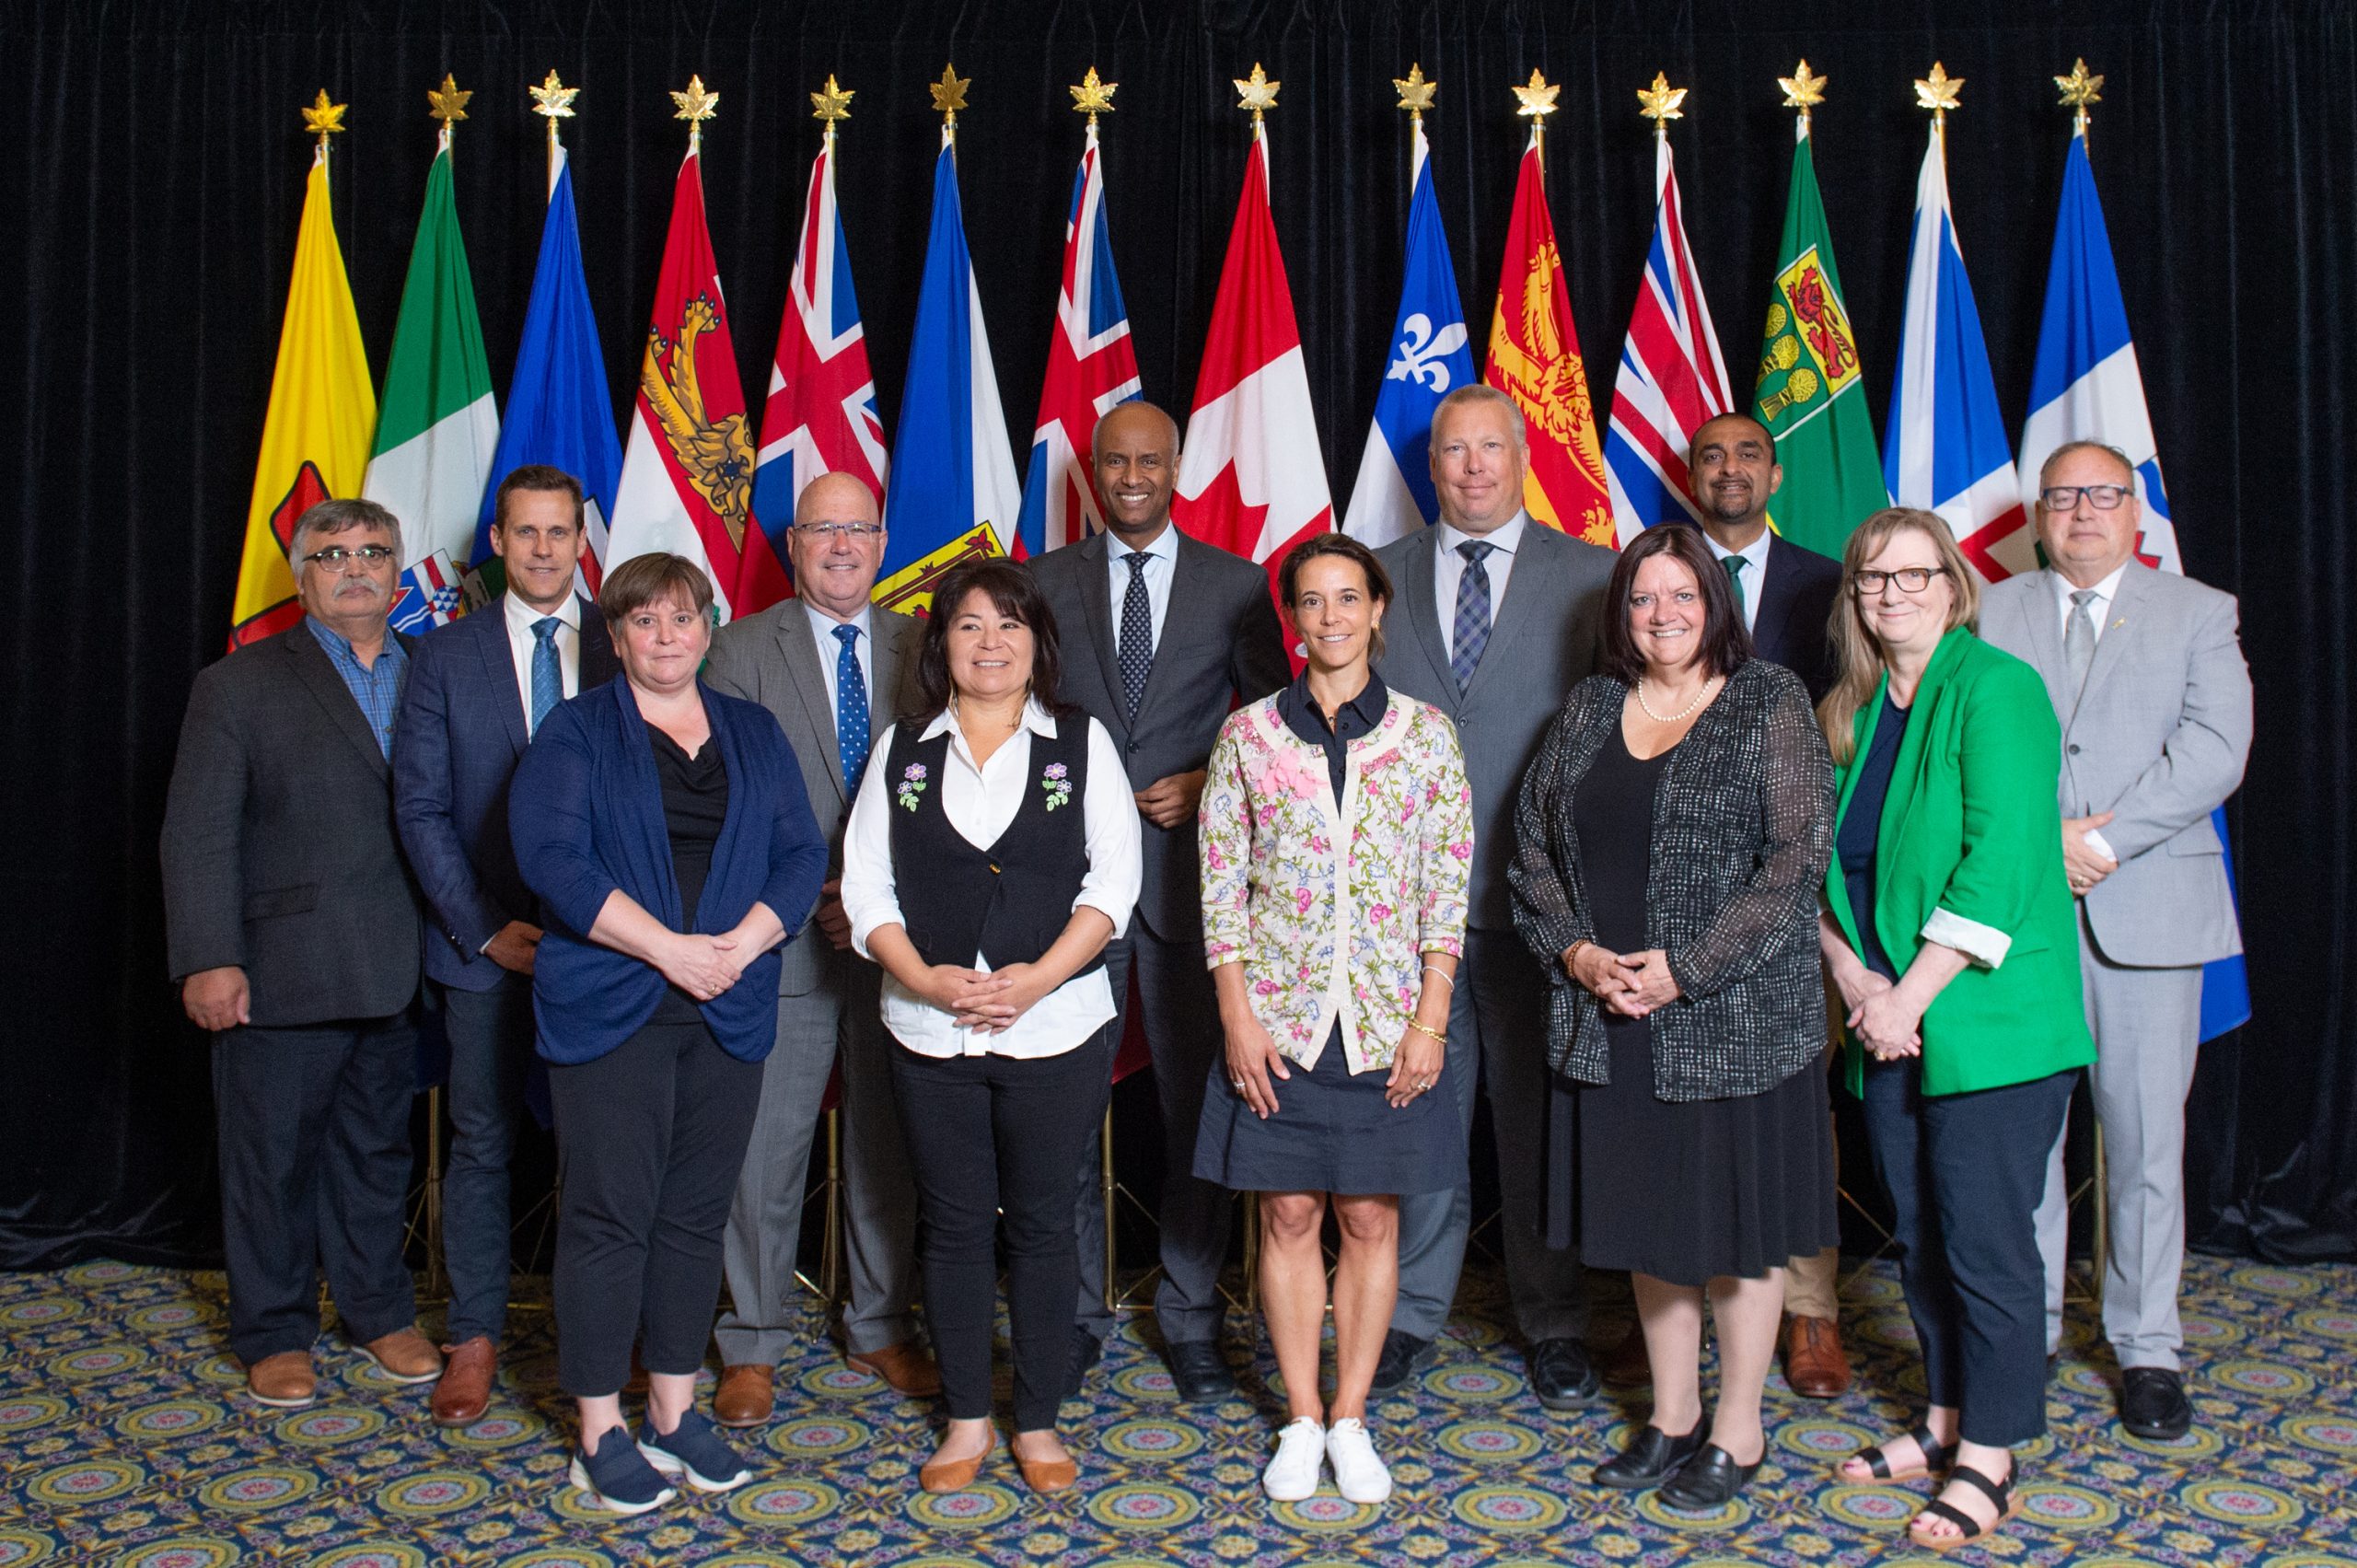 The Honourable Paul Pike, Minister Responsible for the Newfoundland and Labrador Housing Corporation, joined the Honourable Ahmed Hussen, Minister of Housing and Diversity and Inclusion, and other provincial and territorial ministers at the annual meeting of federal, provincial and territorial housing ministers.